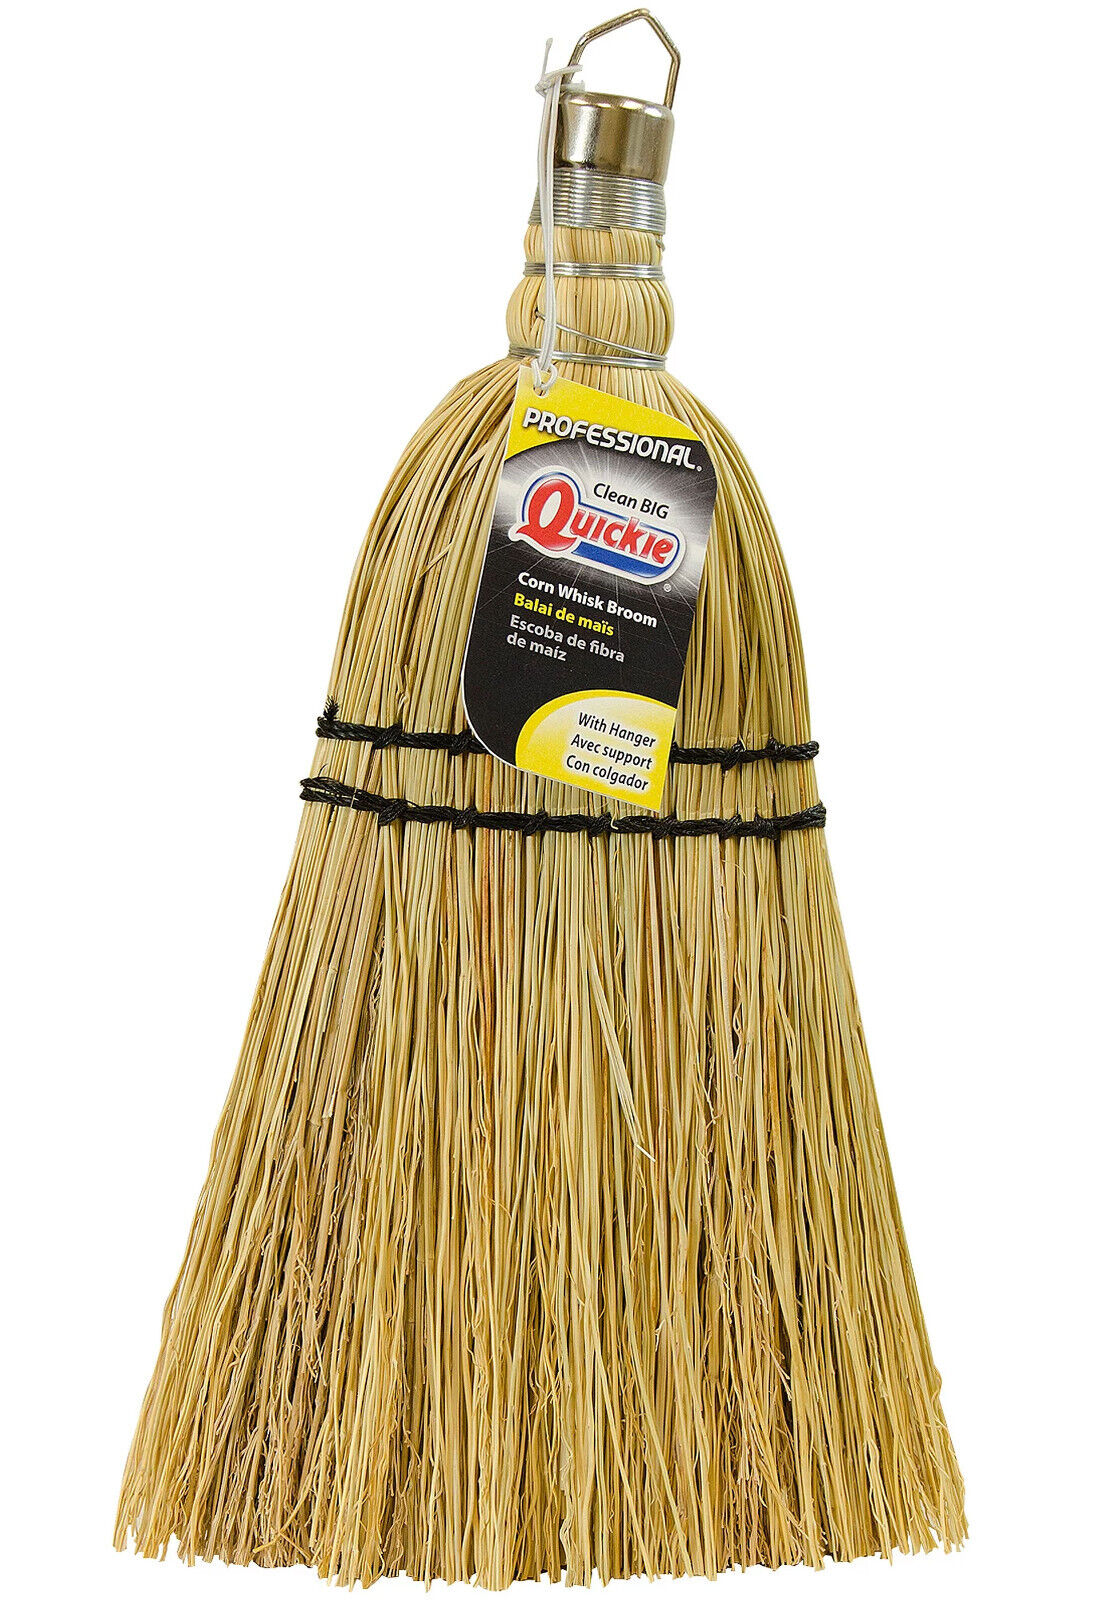 CORN WHISK Hand BROOM yellow straw Fibers Classic valet shop car QUICKIE #405